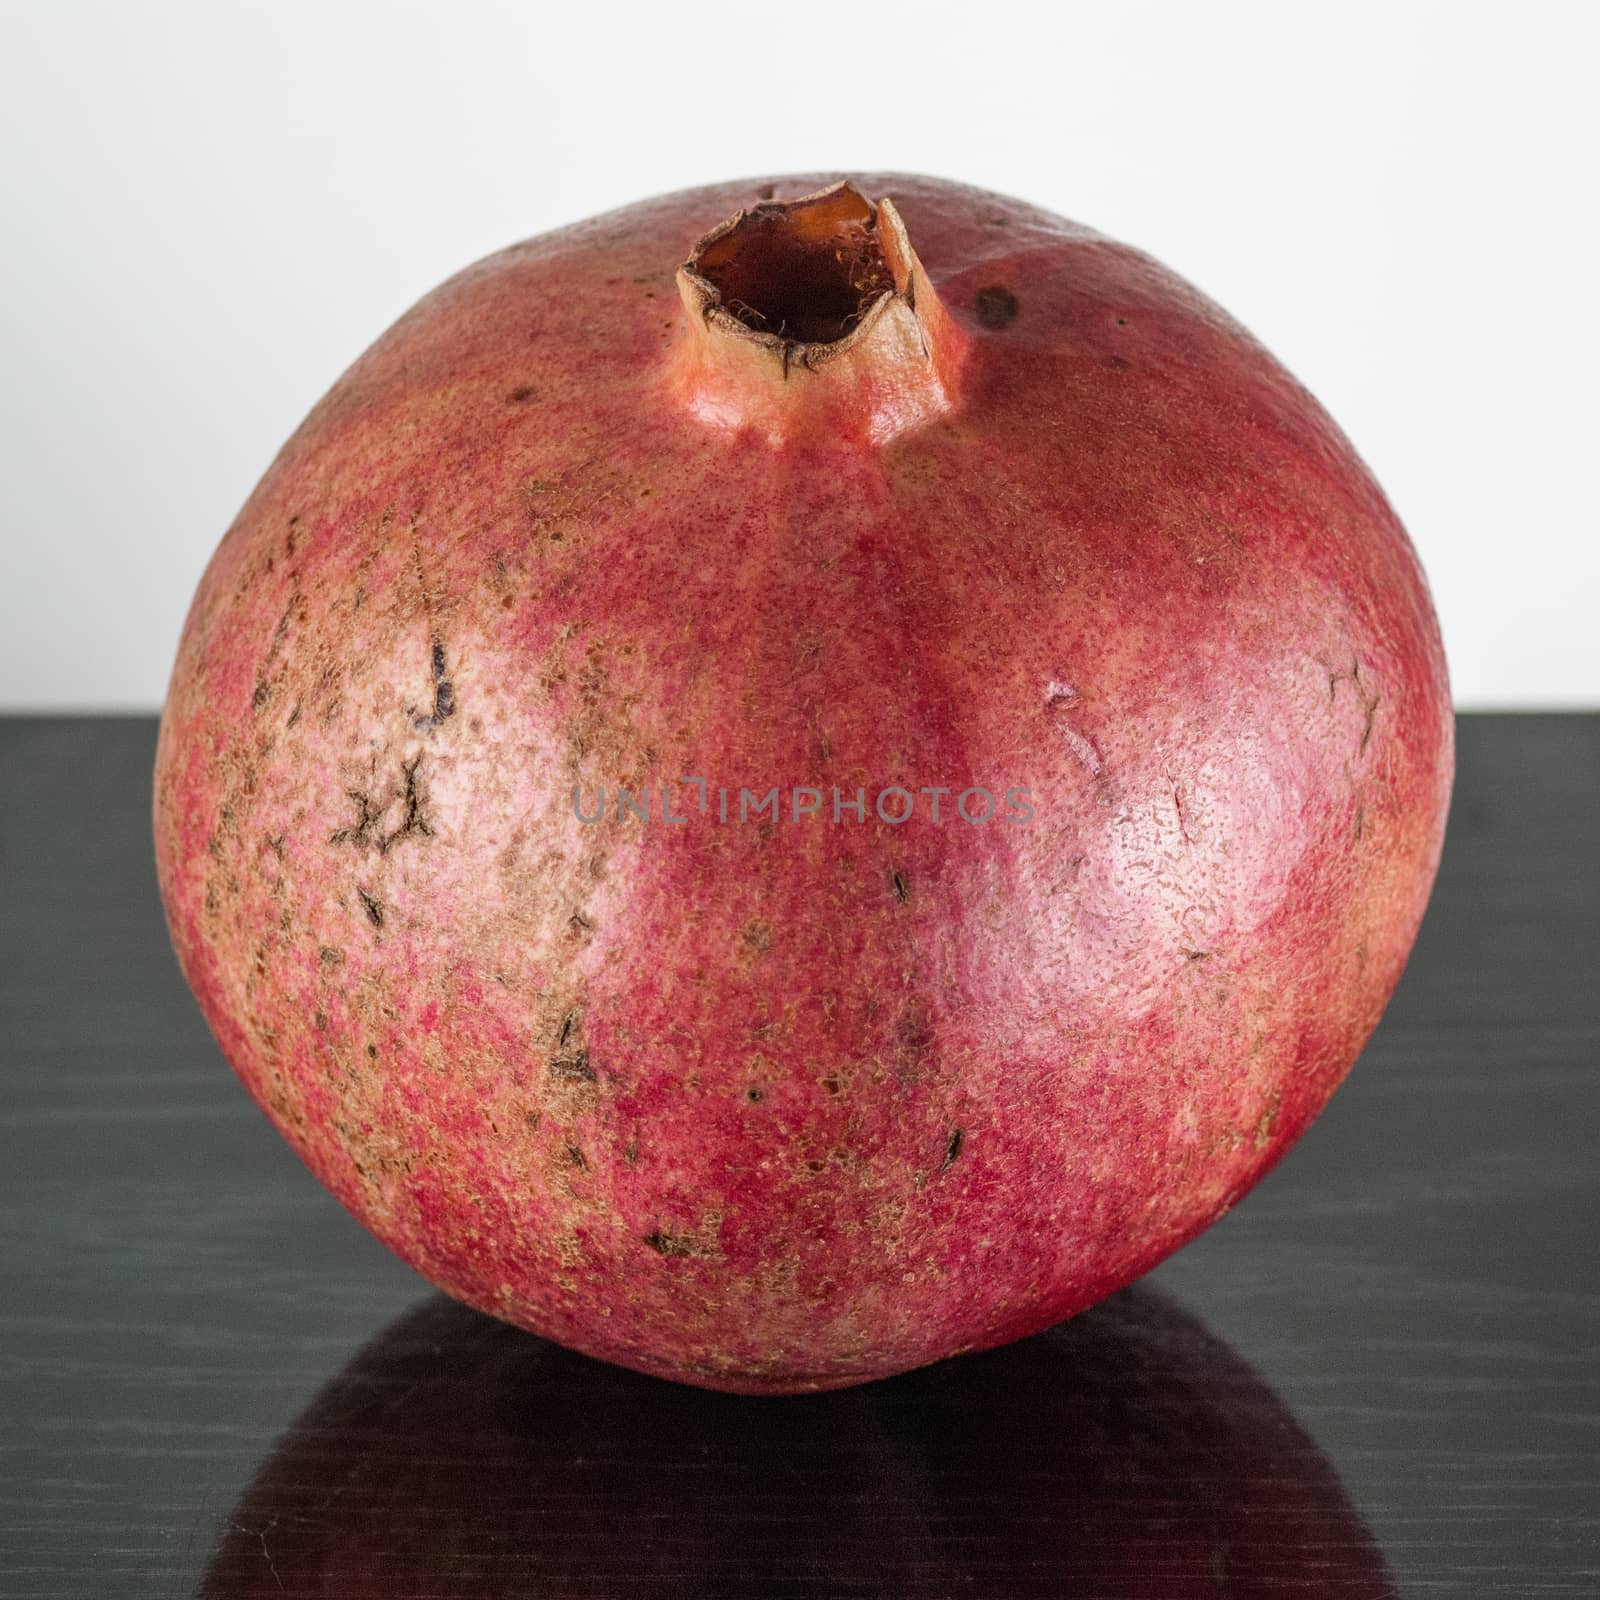  half ripe pomegranate fruit isolated on black wooden plane and white background  by skrotov